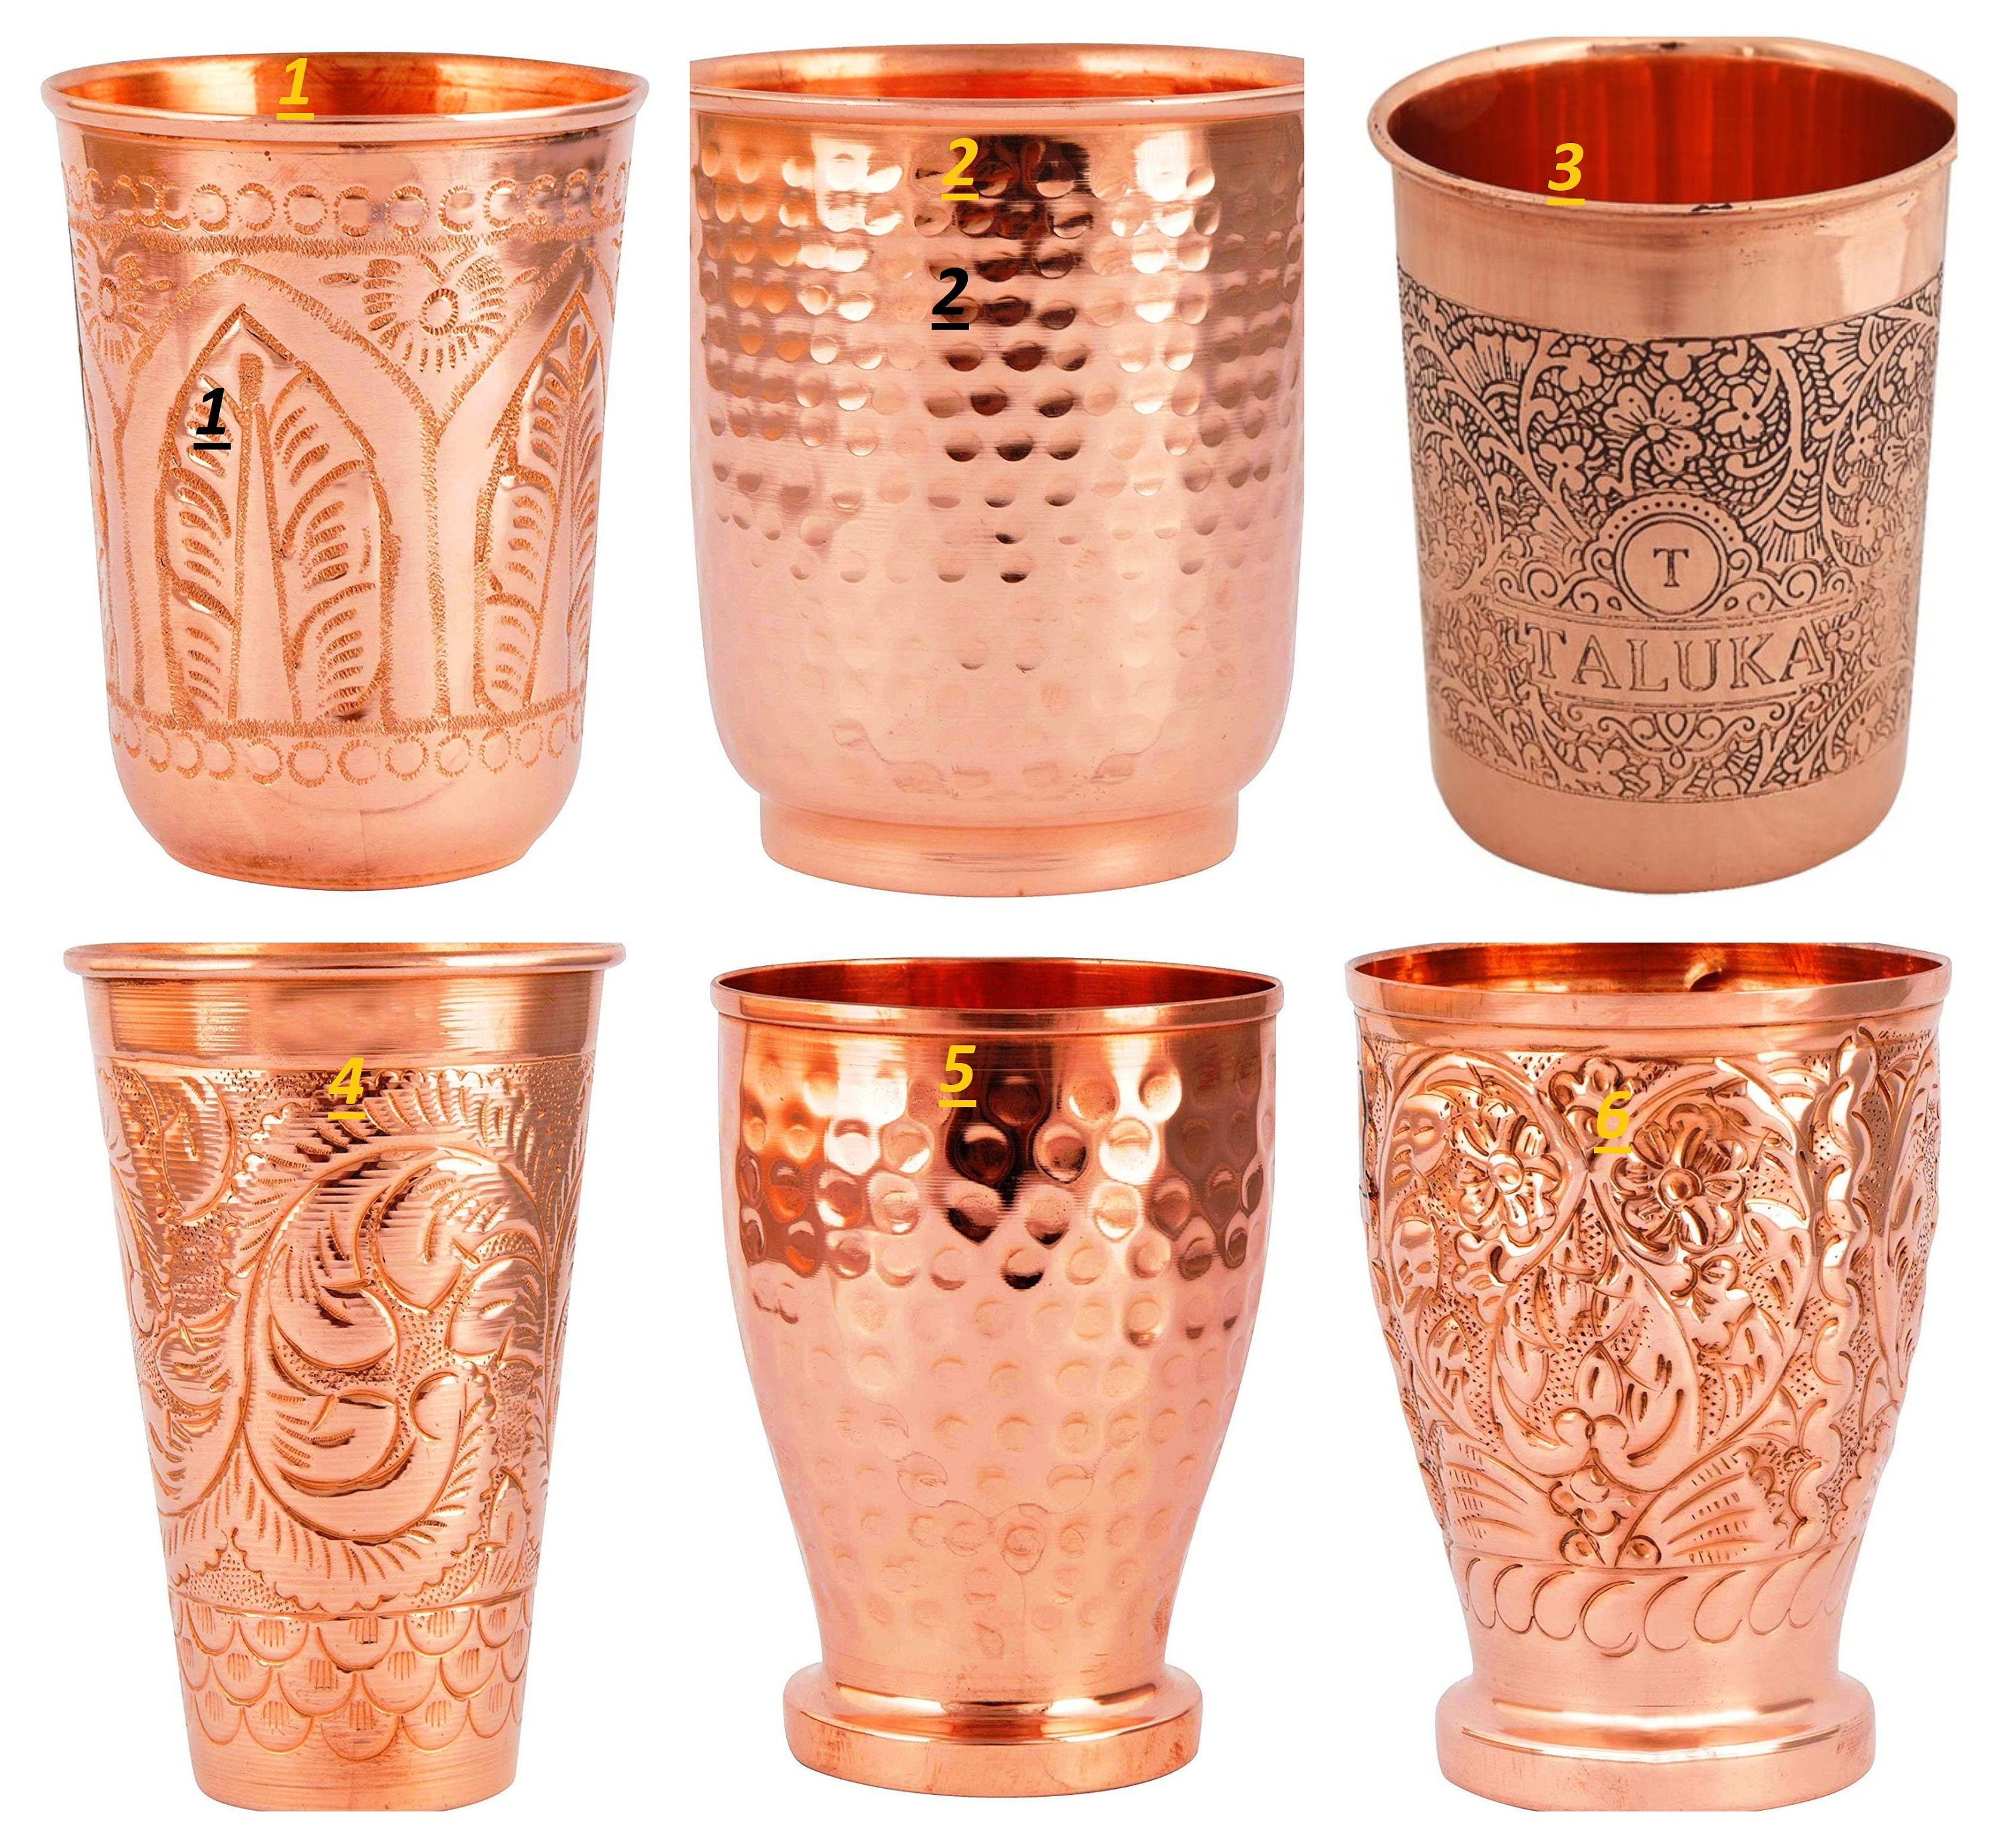 100% Copper Handmade Water Drinking Glass Tumbler For Health Yoga Benefits 2 Pcs 